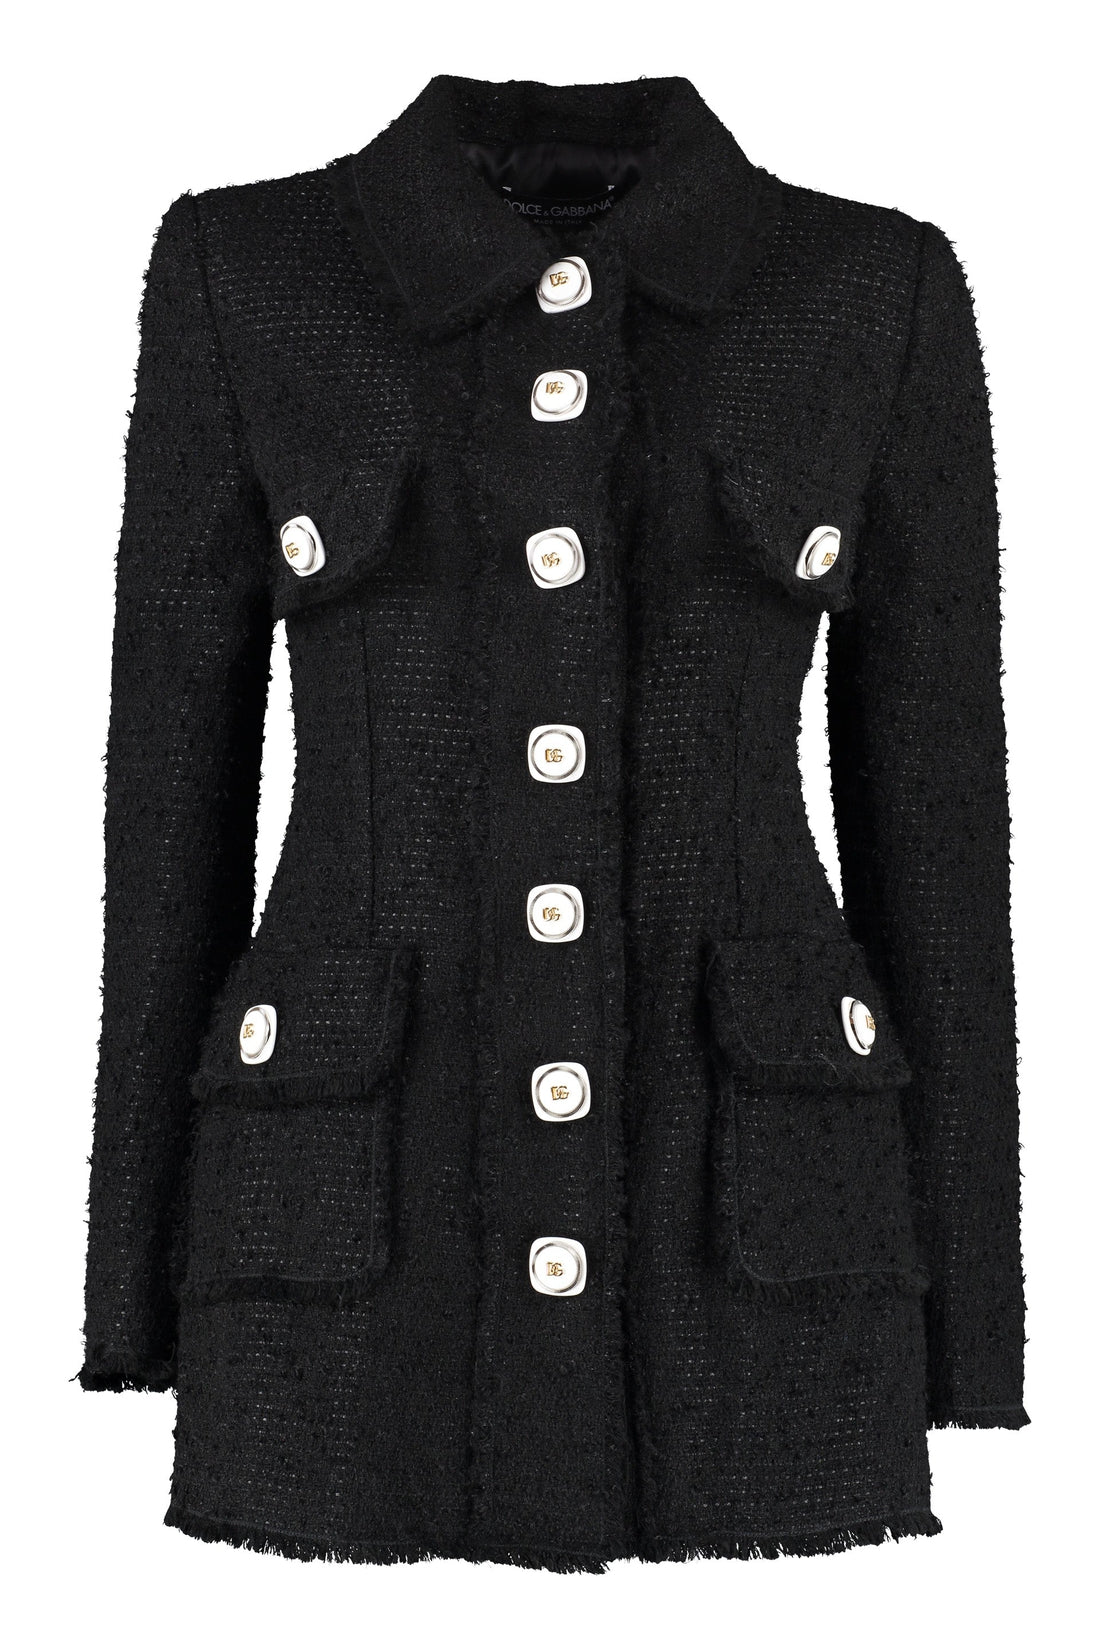 Dolce & Gabbana-OUTLET-SALE-Single-breasted mixed wool tweed jacket-ARCHIVIST